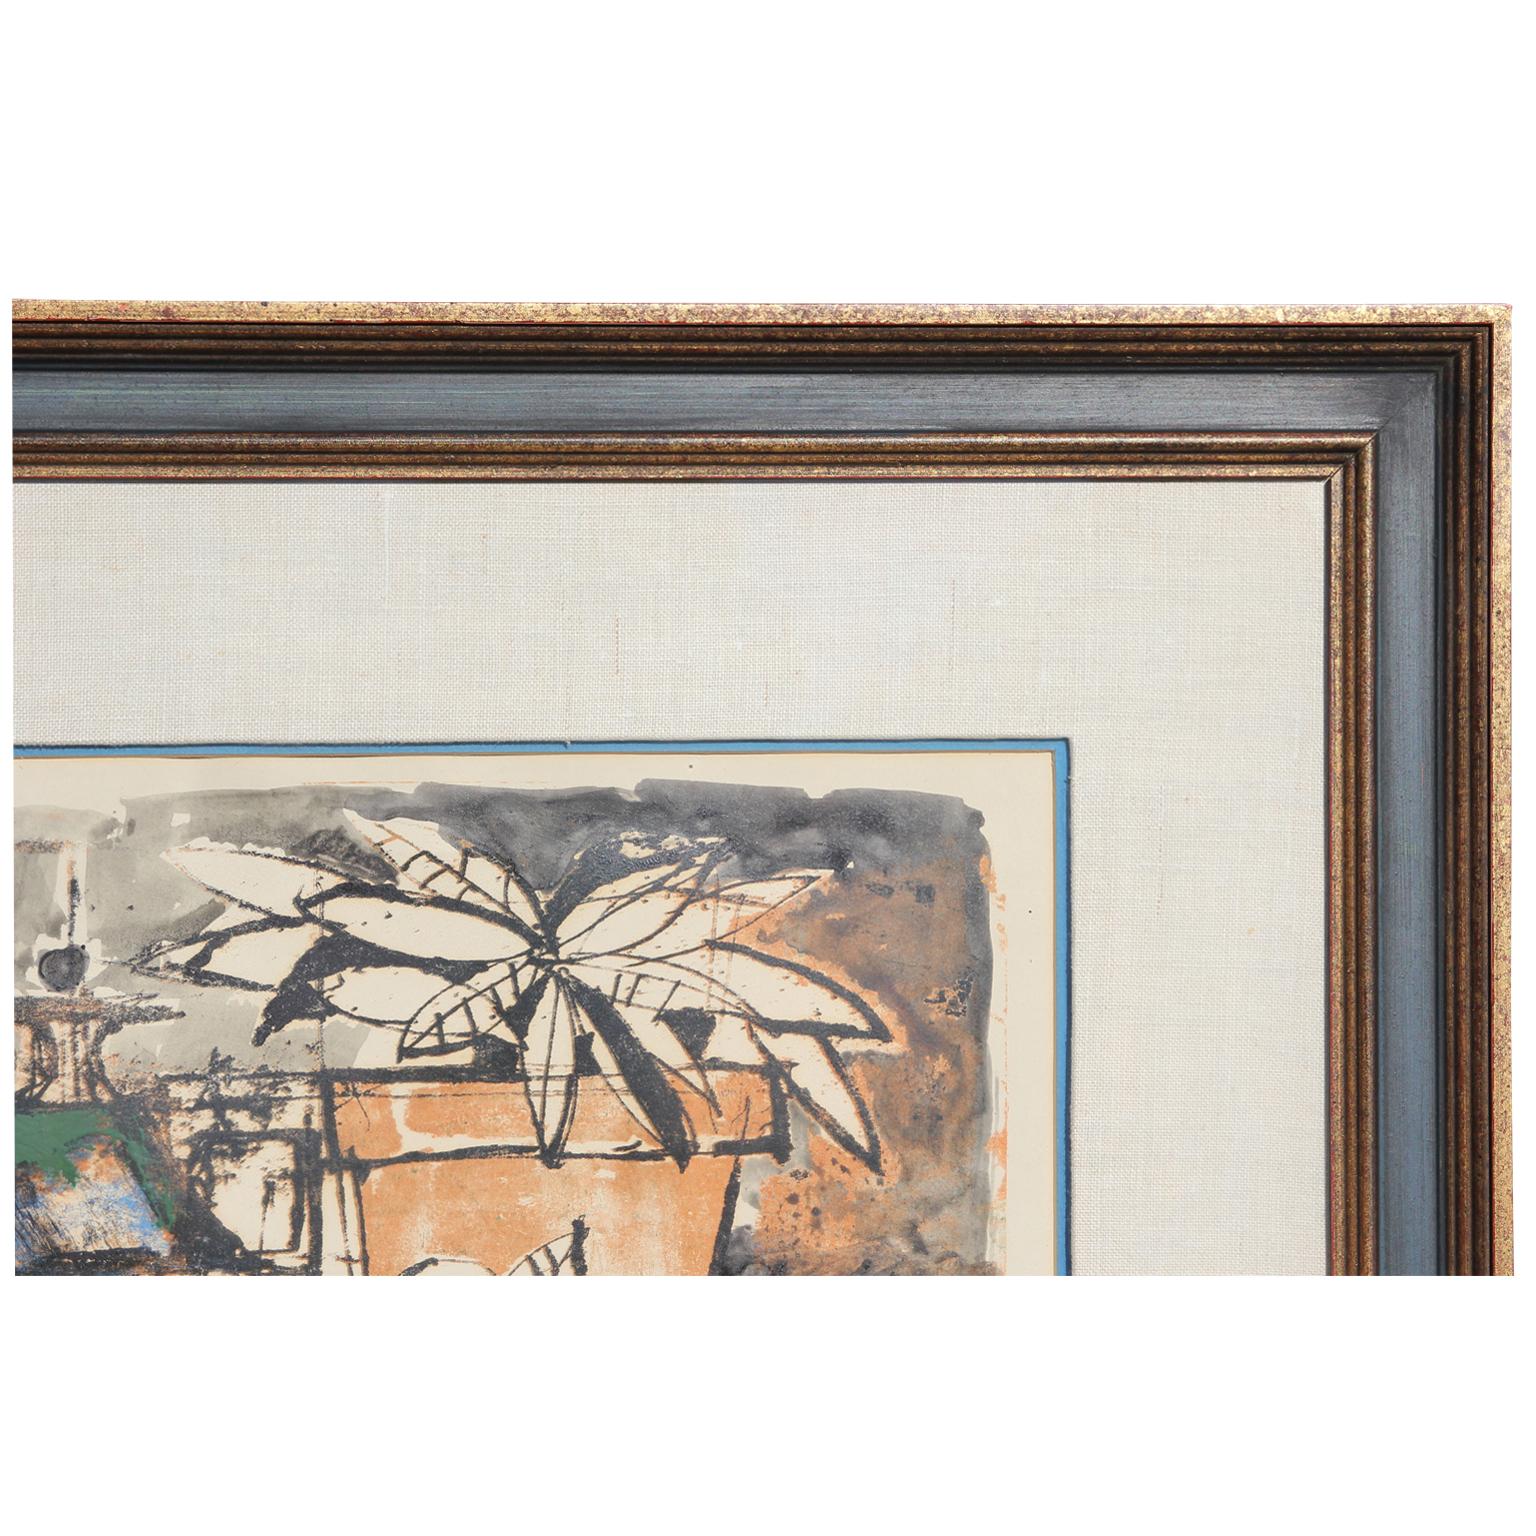 Blue and orange abstract impressionist still life lithograph of plants, fruit, and containers on a table. Signed, dated, and titled along lower edge of the piece in pencil by the artist. Hung in complimentary neutral frame with a cream matte.